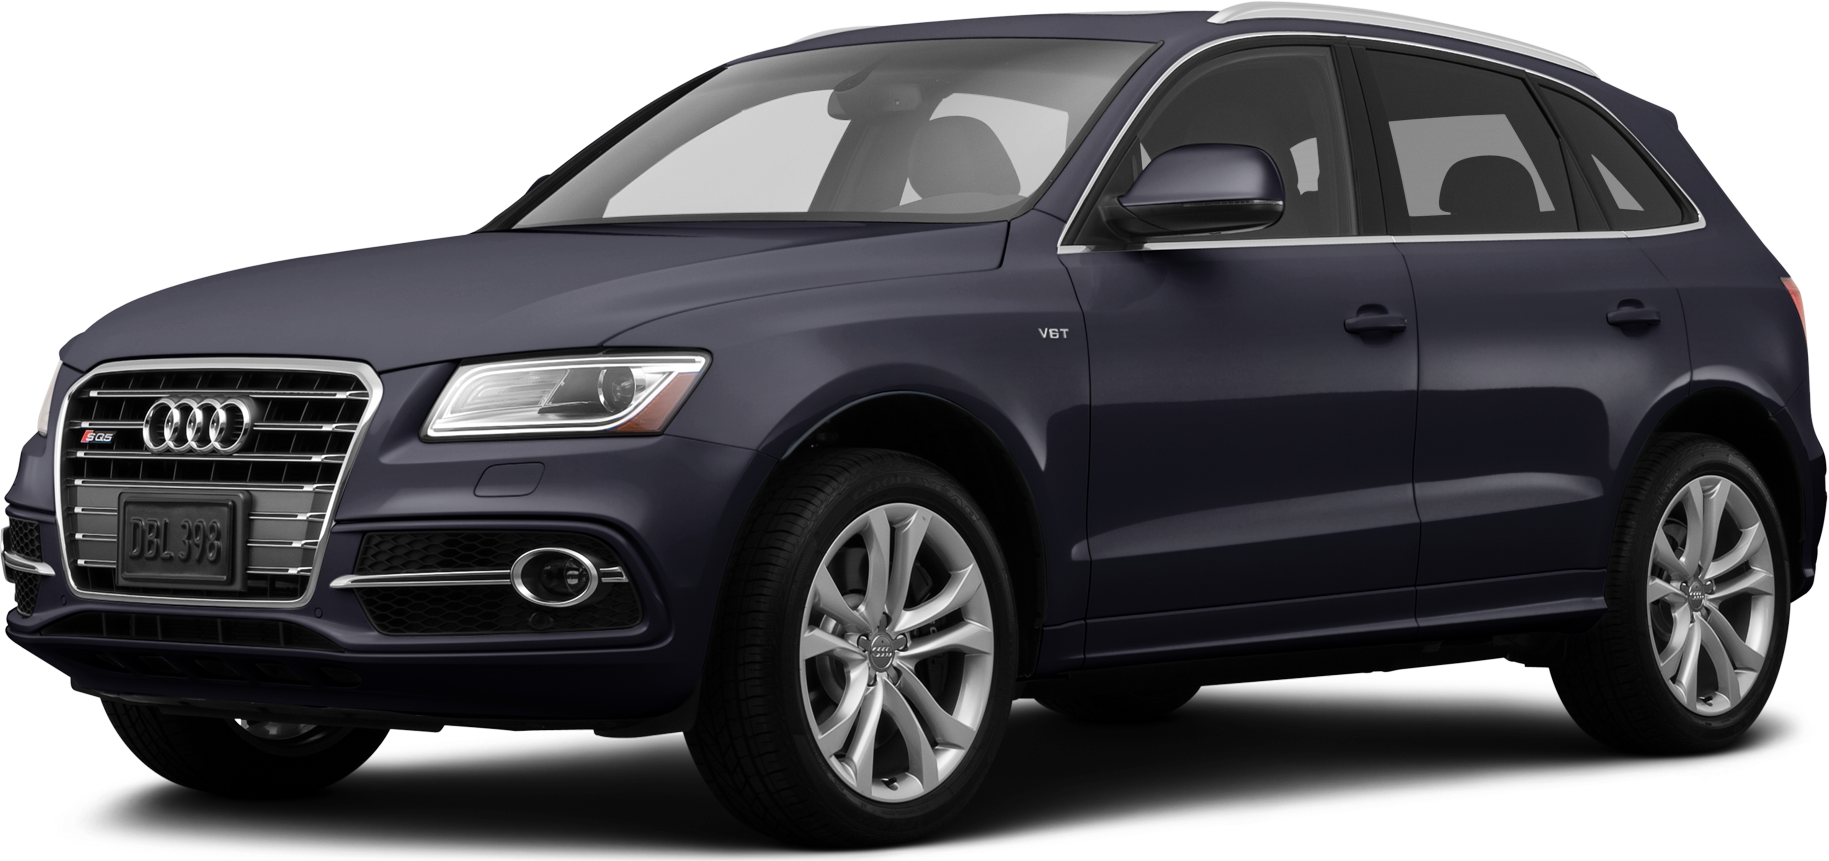 https://file.kelleybluebookimages.com/kbb/base/evox/CP/9032/2015-Audi-SQ5-front_9032_032_1829x861_1R1R_cropped.png